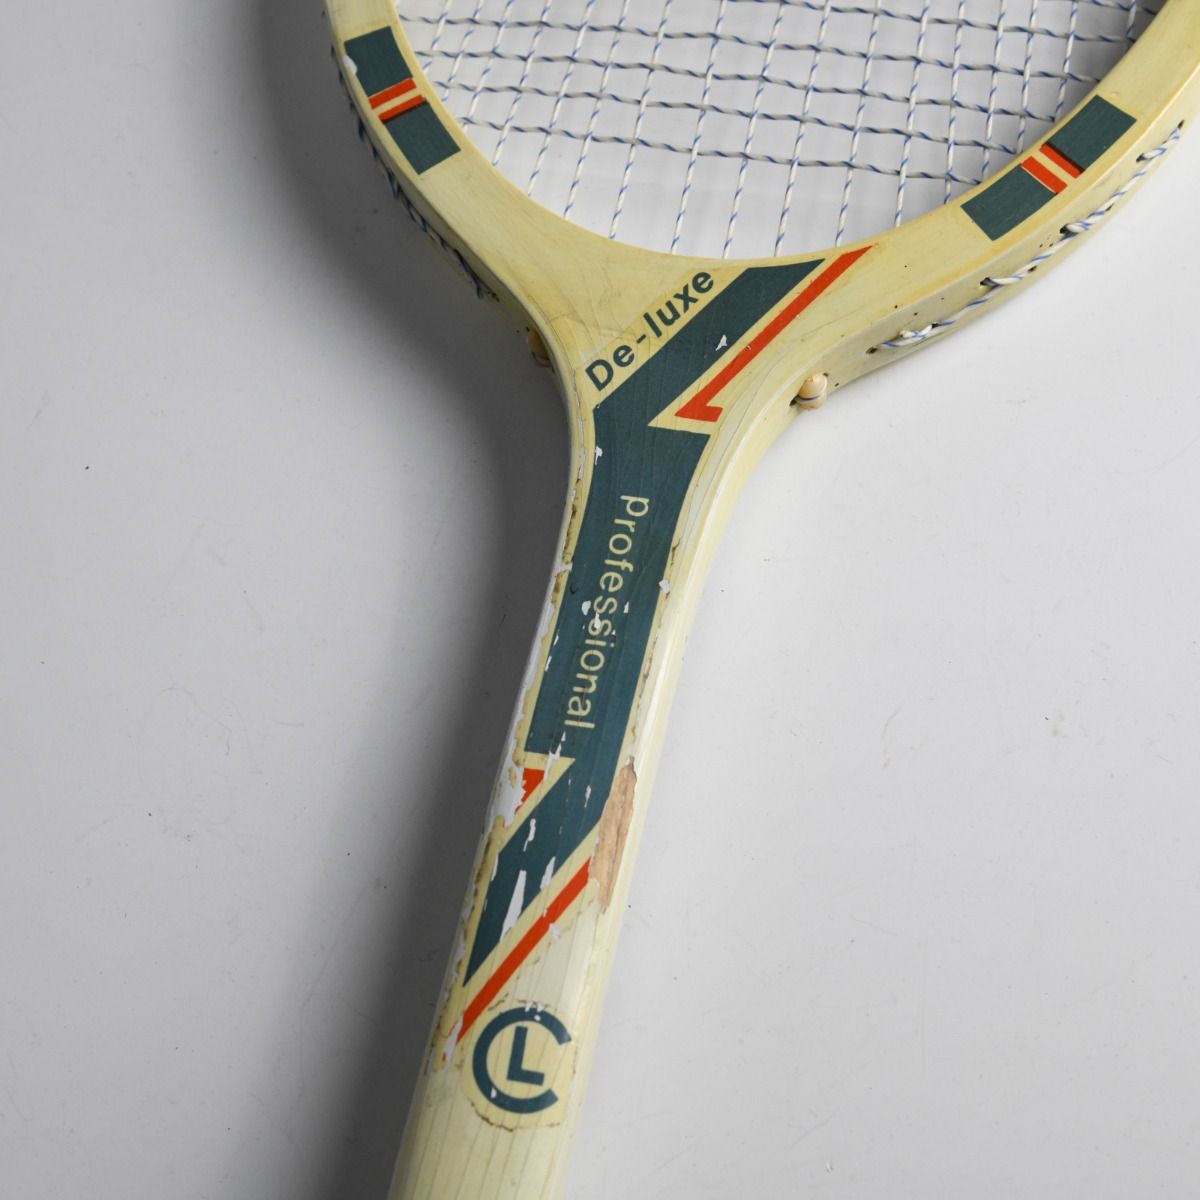 Vintage De-Luxe Wooden Squash Racket with Cover